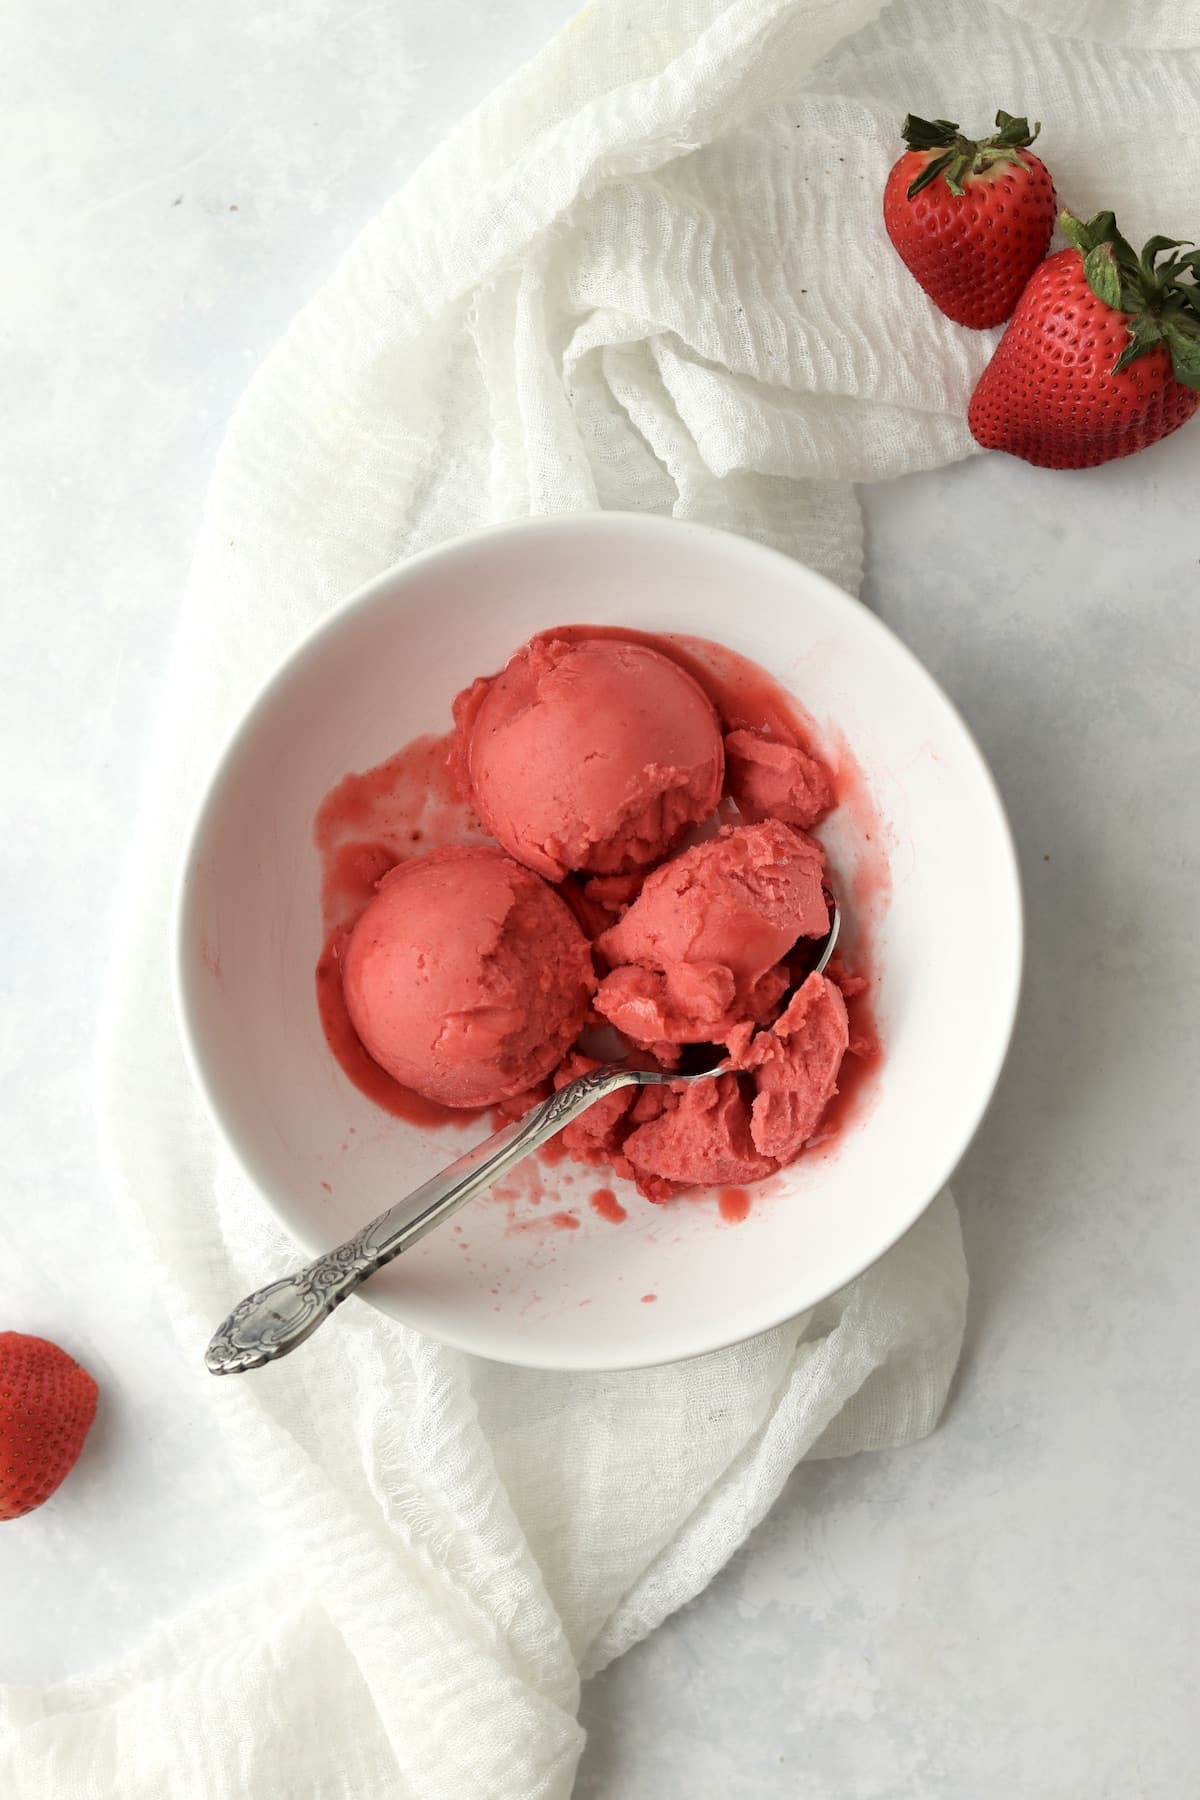 Ninja Creami Strawberry Sorbet scooped in a bowl with fresh strawberries.